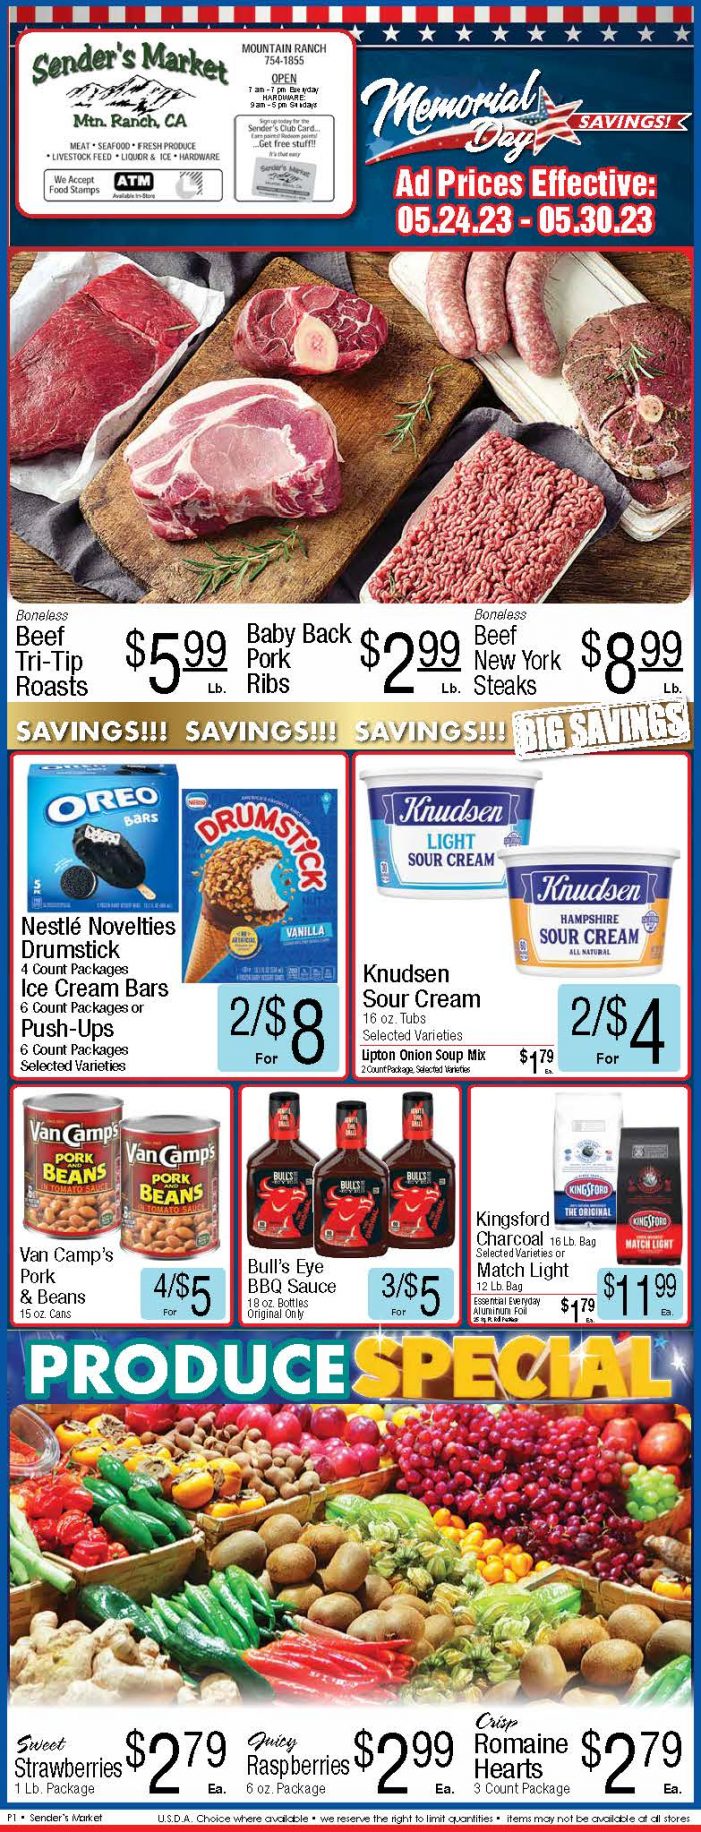 Sender’s Market Weekly Ad & Grocery Specials Through May 30th! Shop Local & Save!!